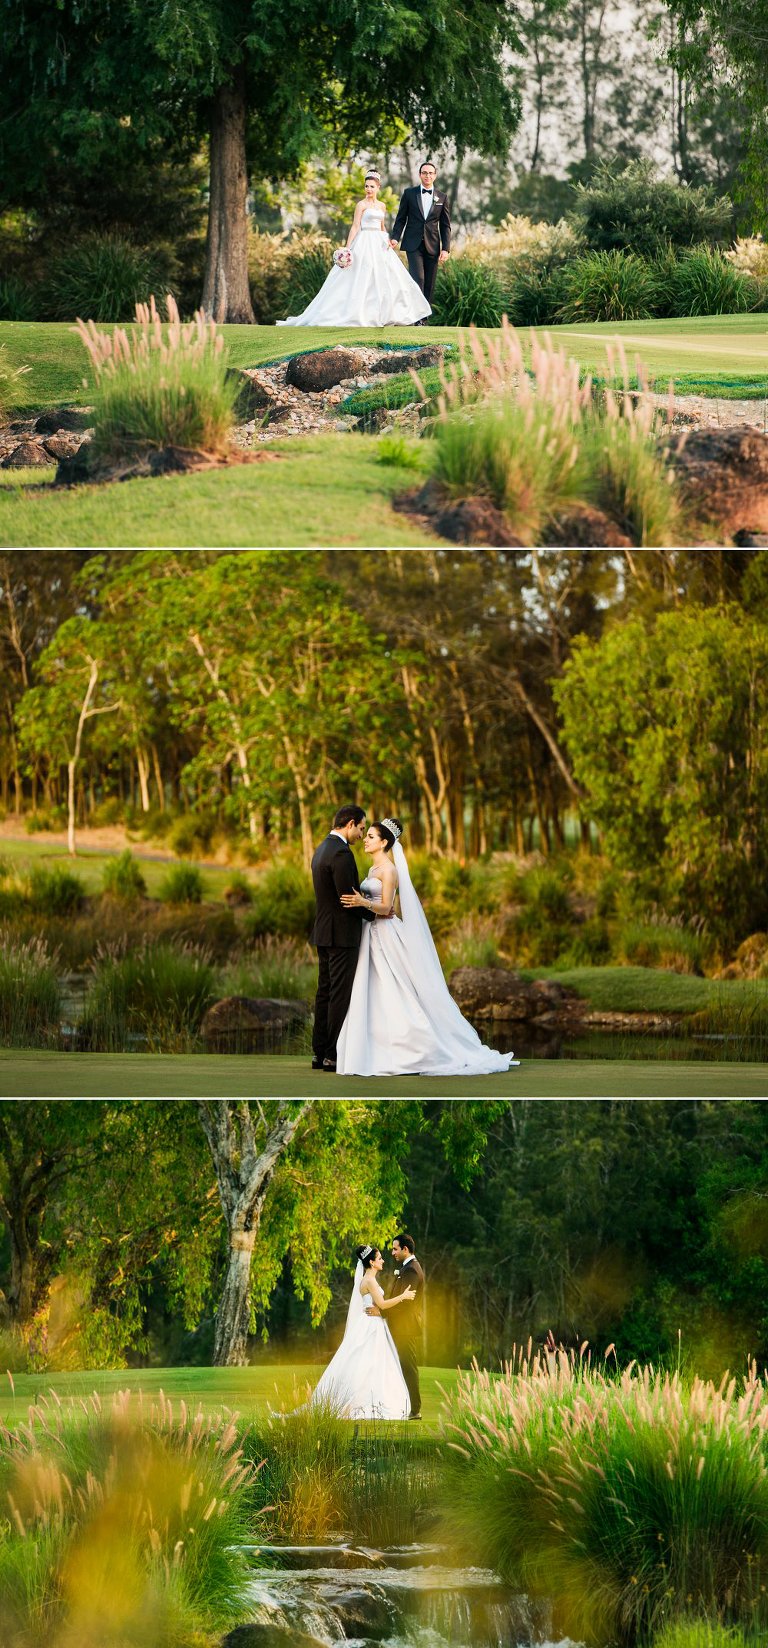 Brisbane Wedding Photography - Forever Yours Photography